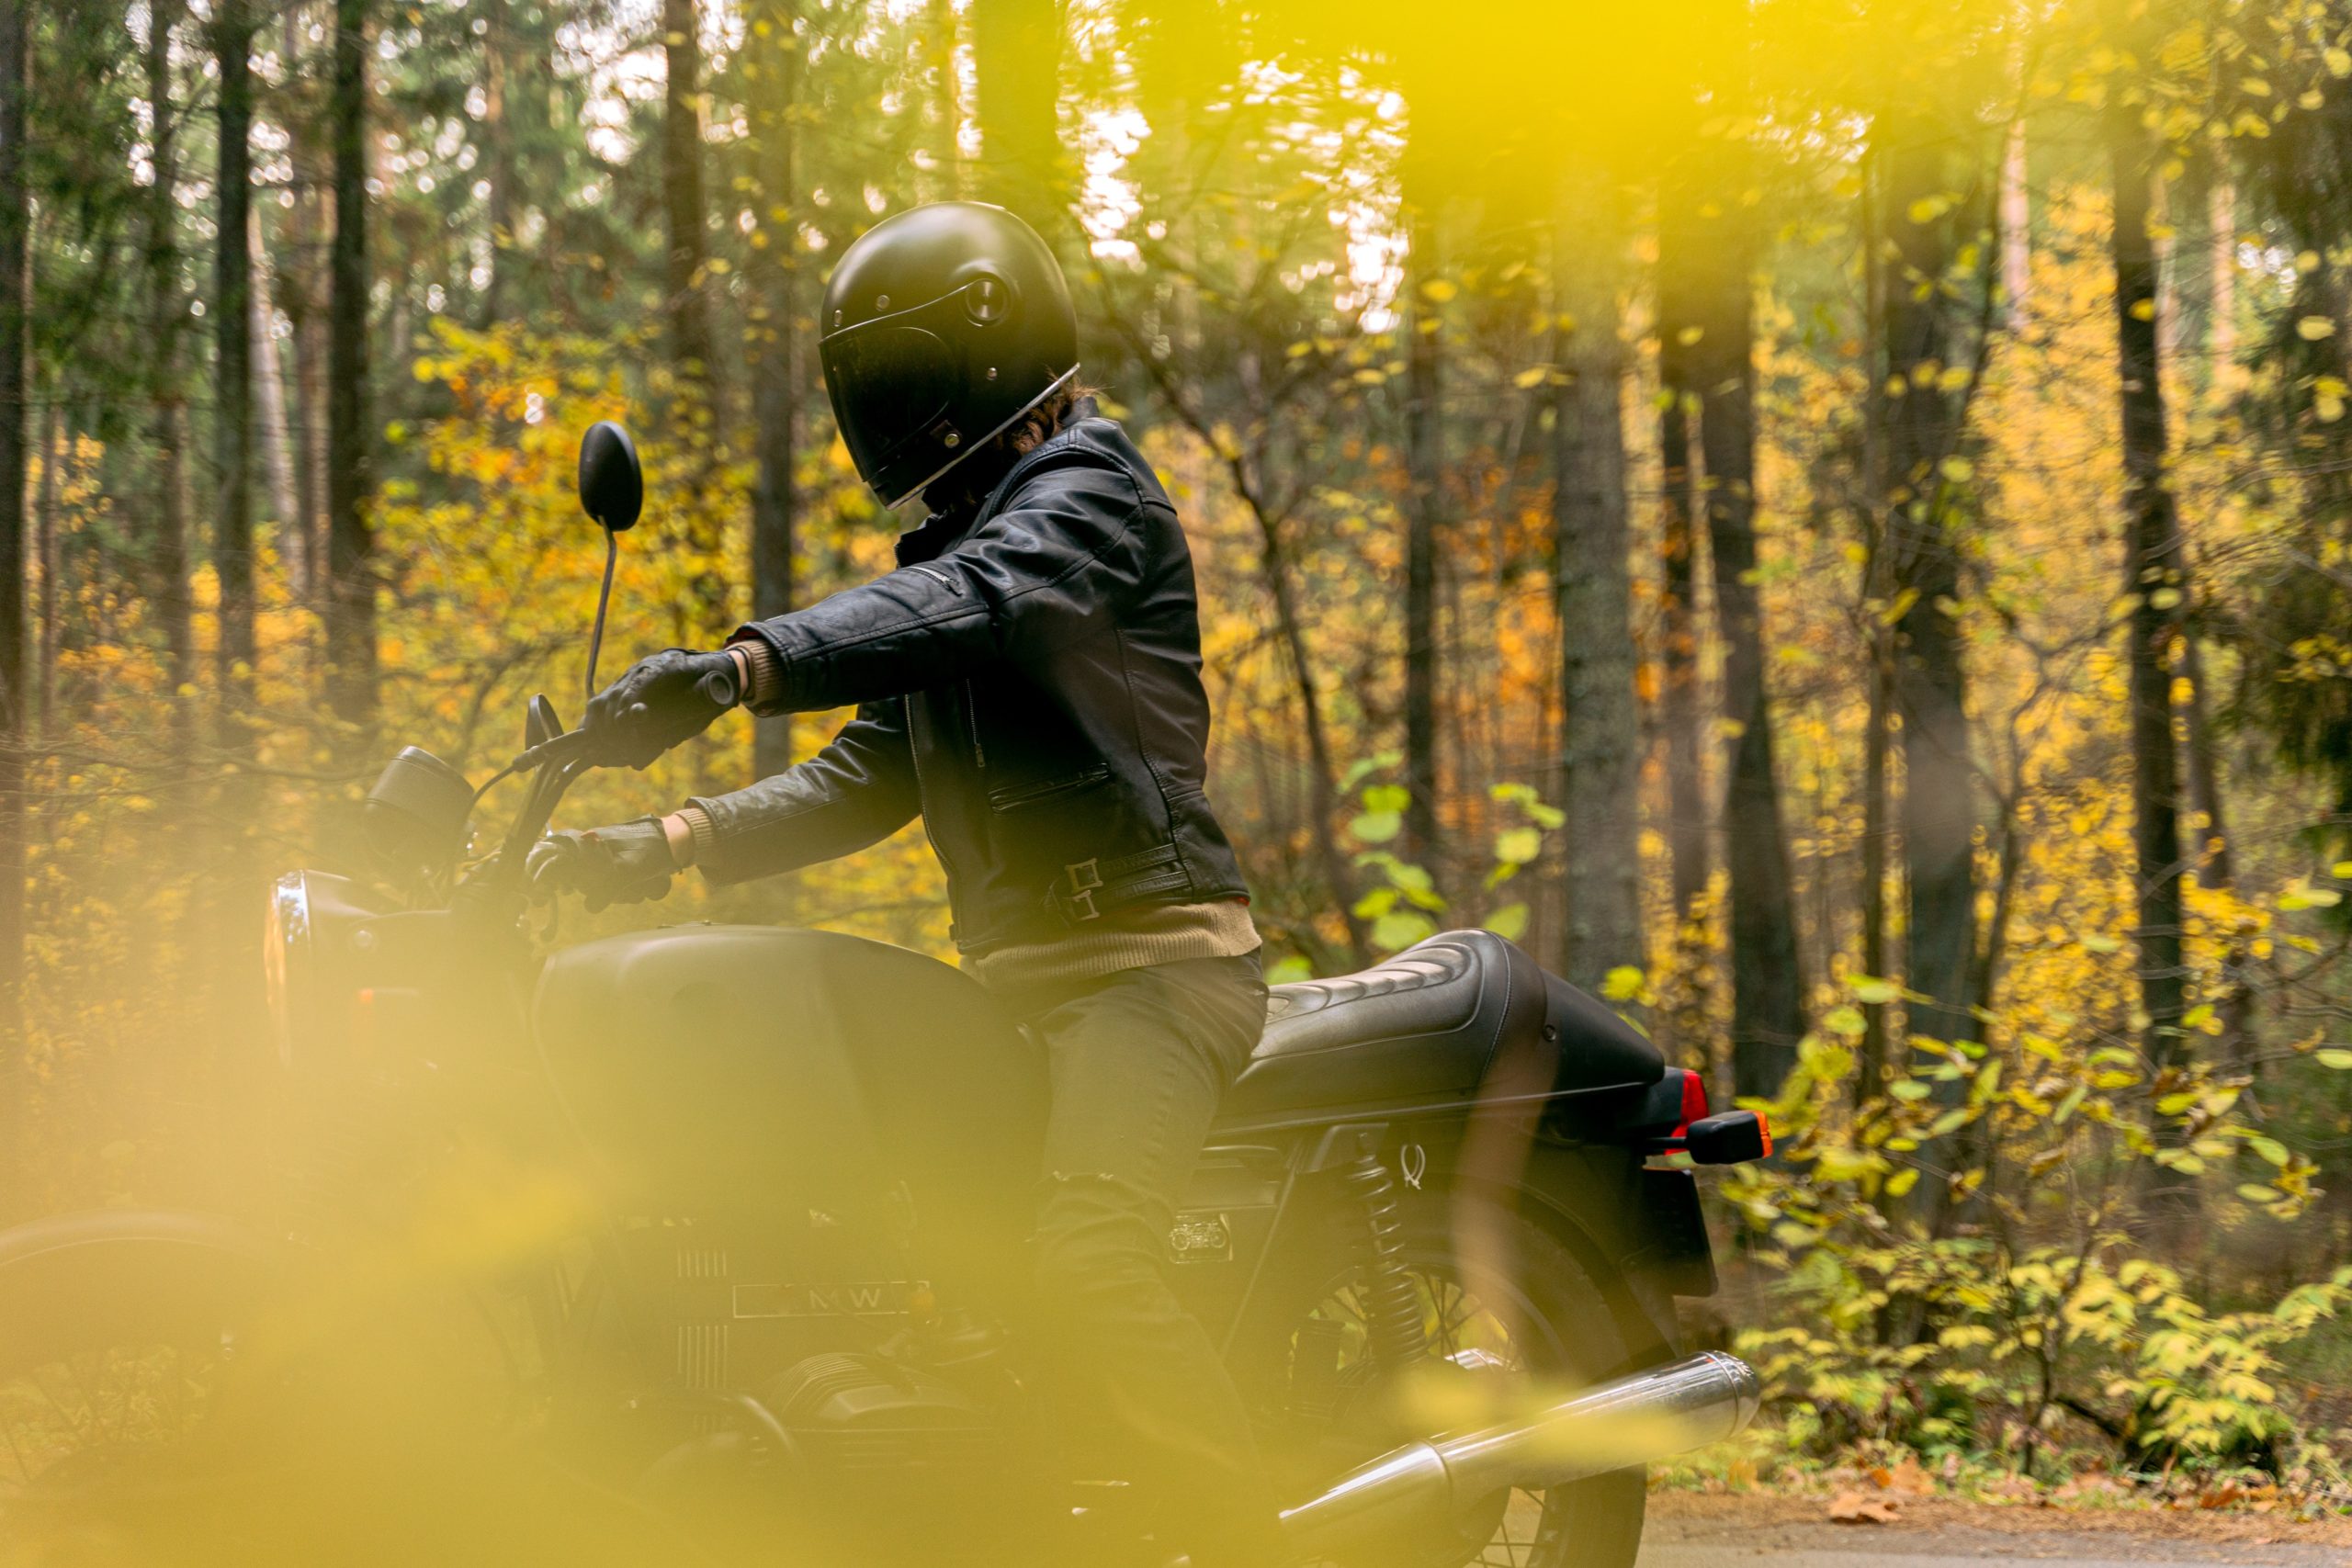 motorcyclist in the woods